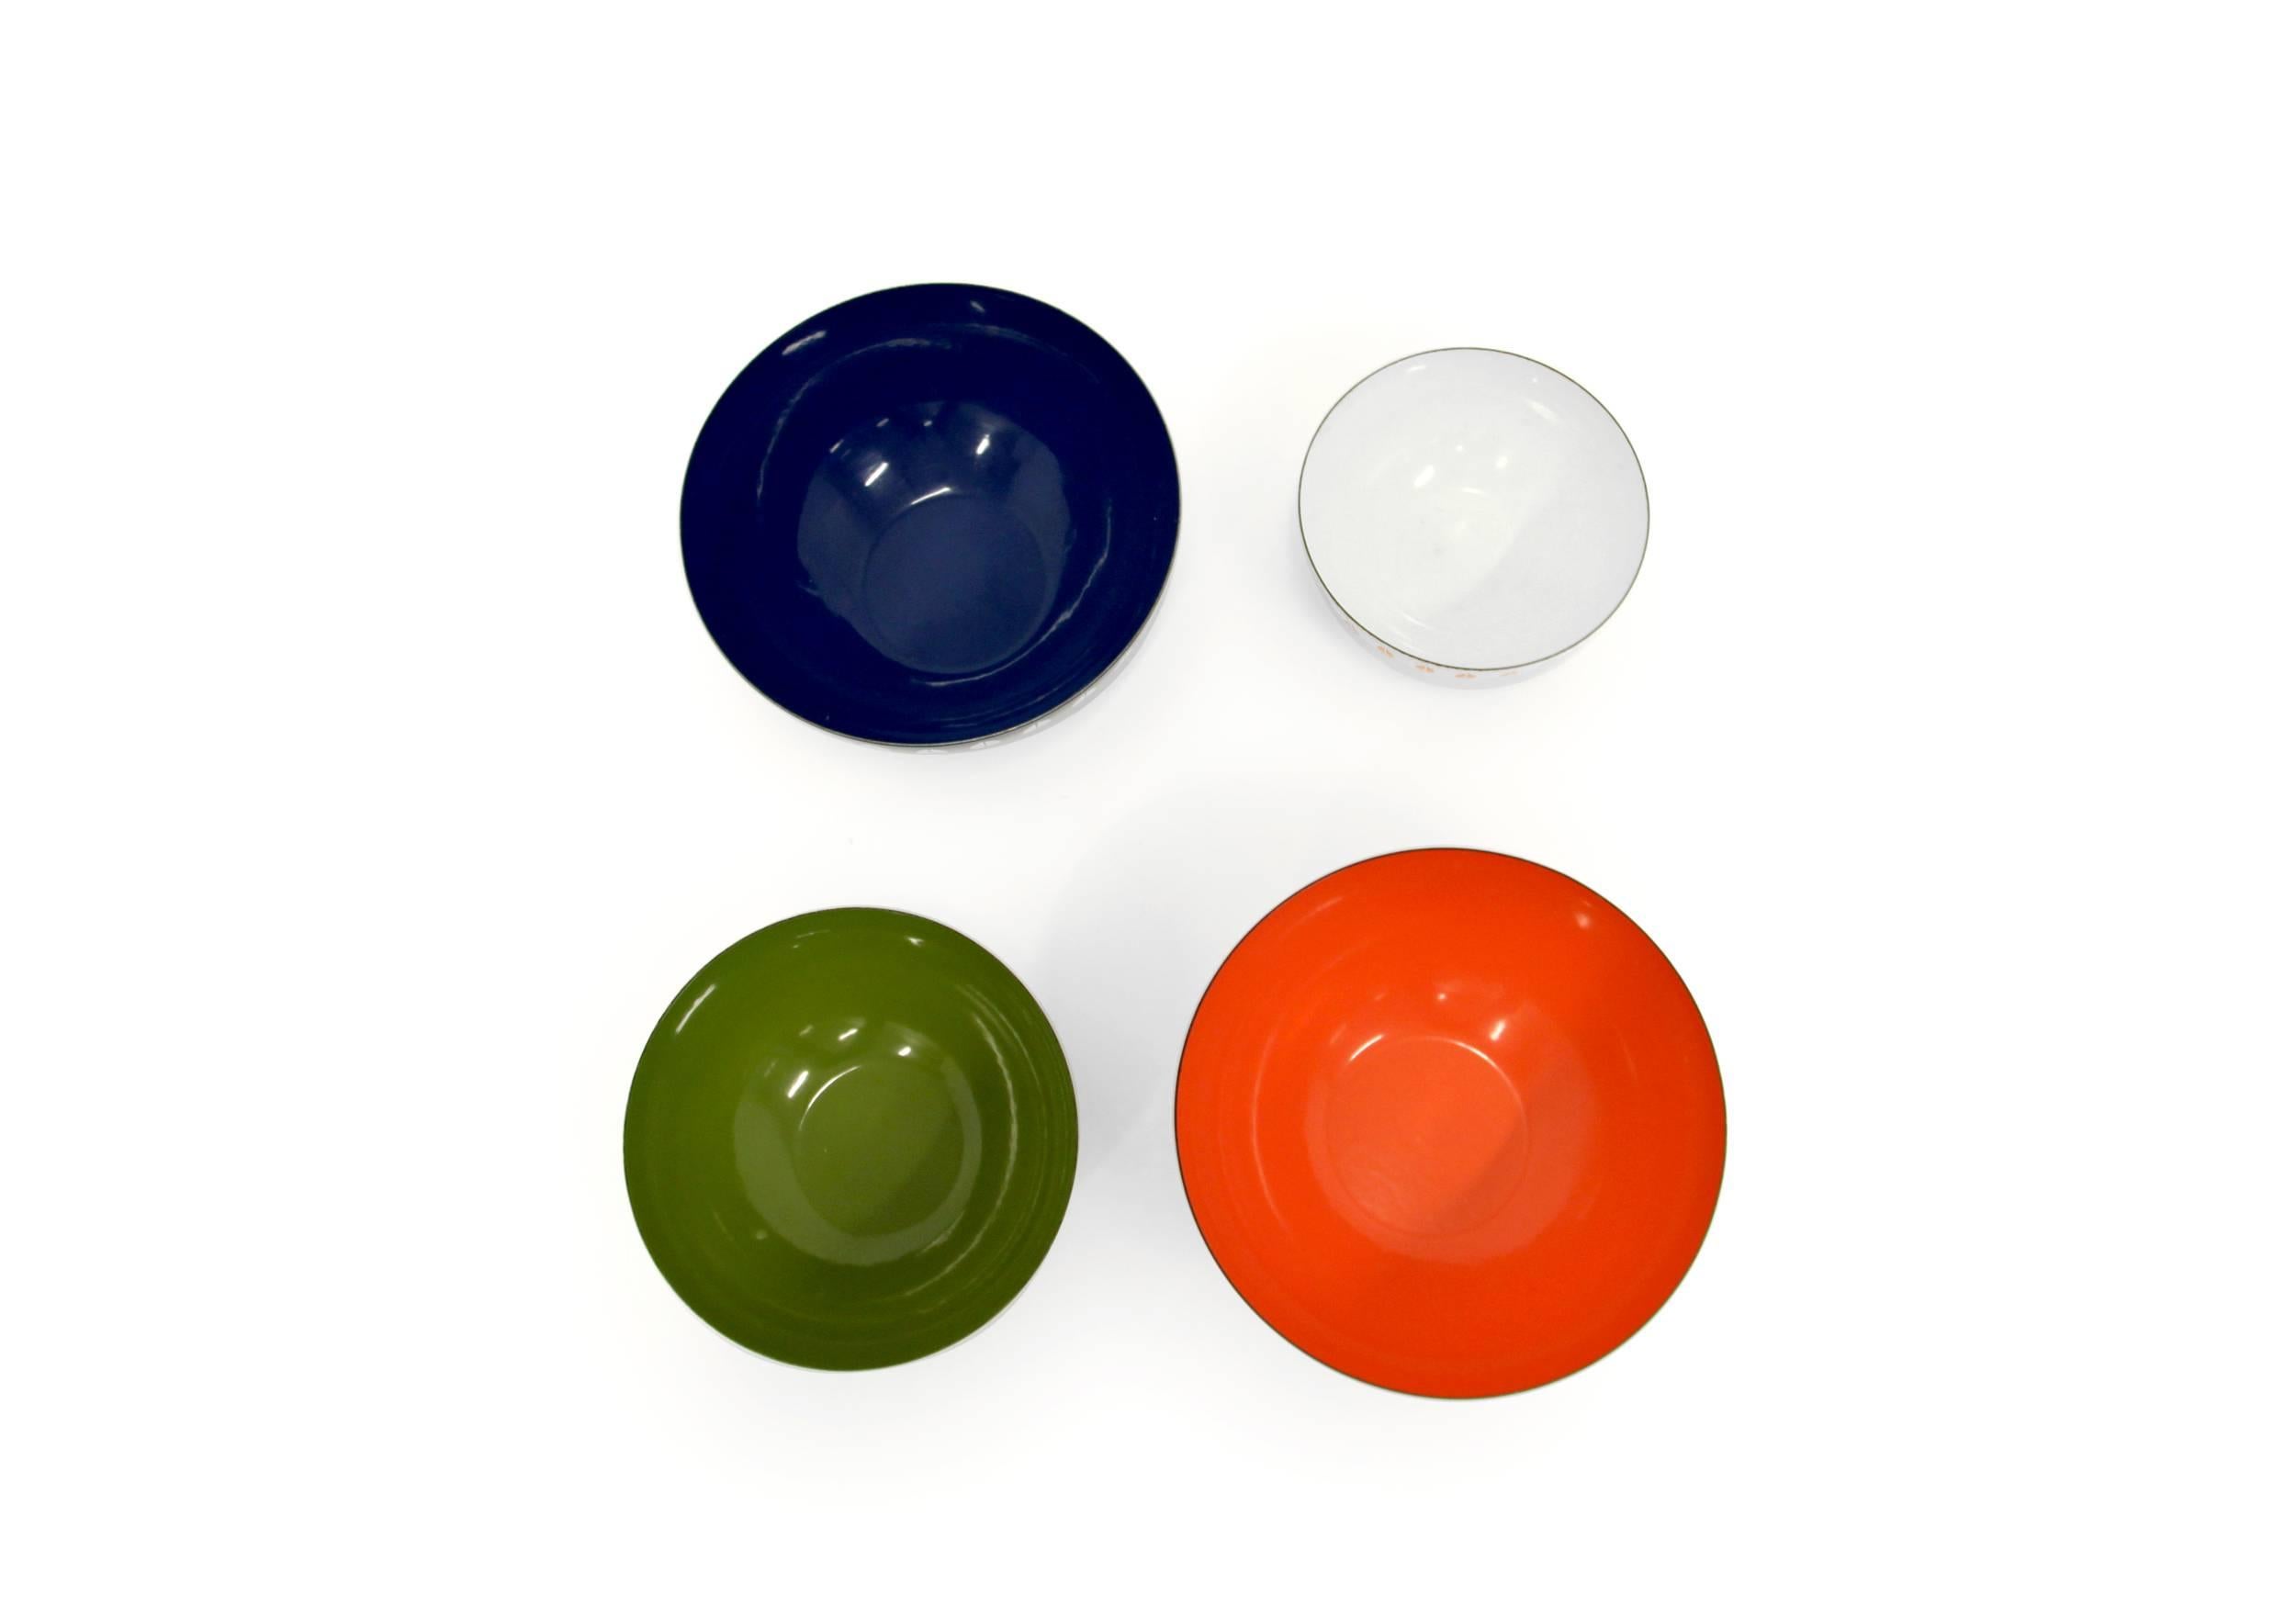 A set of beautiful enamel and steel bowls designed by Grete Prytz Kittelsen and Arne Clausen.

Manufactured in Norway from, circa 1960 first half by Cathrineholm.

The blue and orange bowl are the large version with a diameter of 28.5 cm.